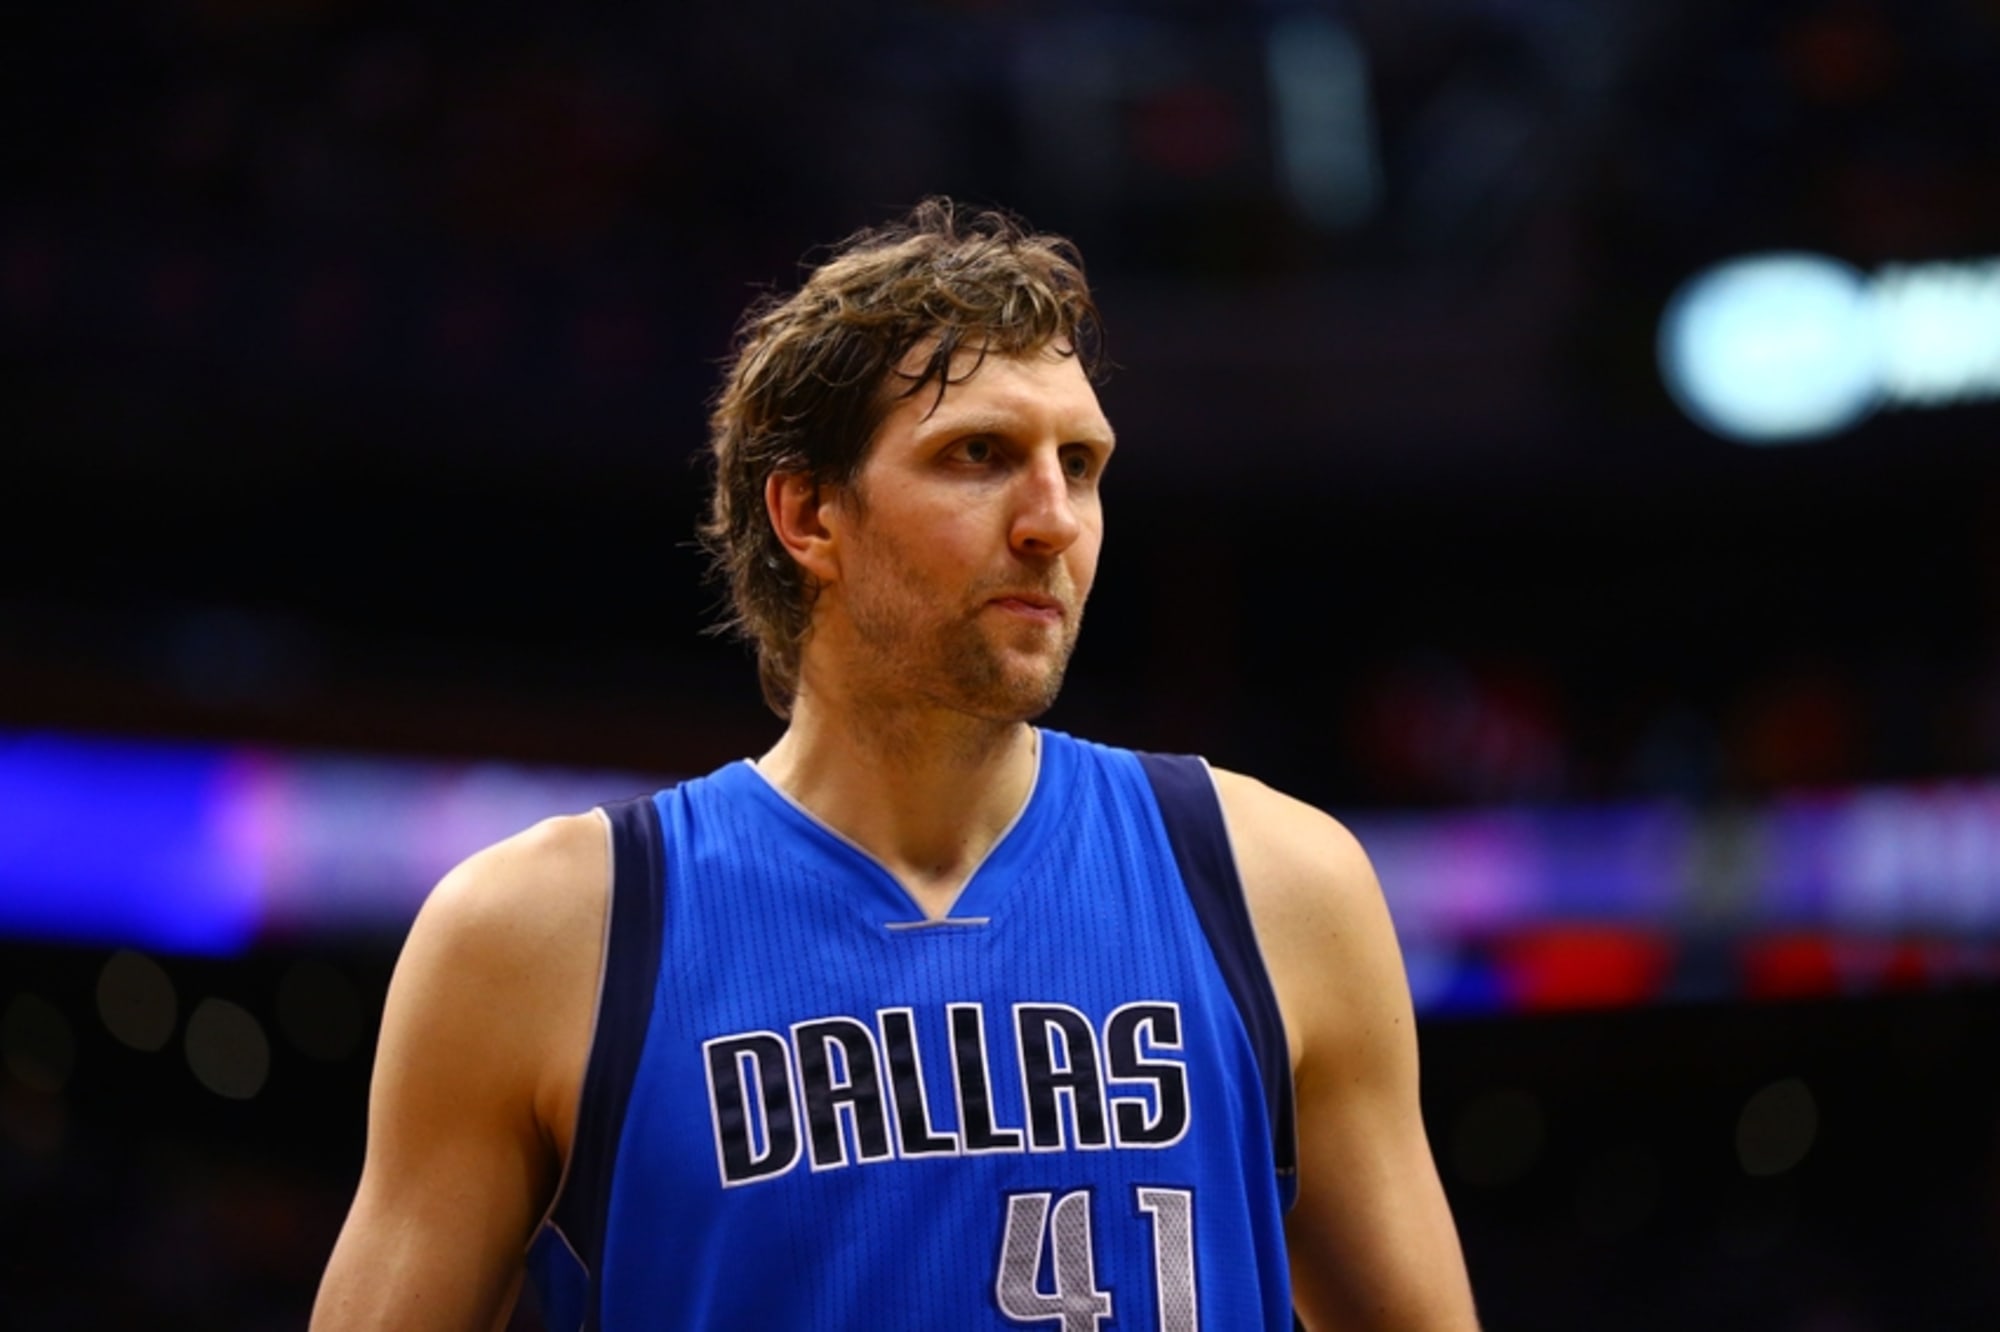 Dirk Nowitzki becomes first player to have number retired by